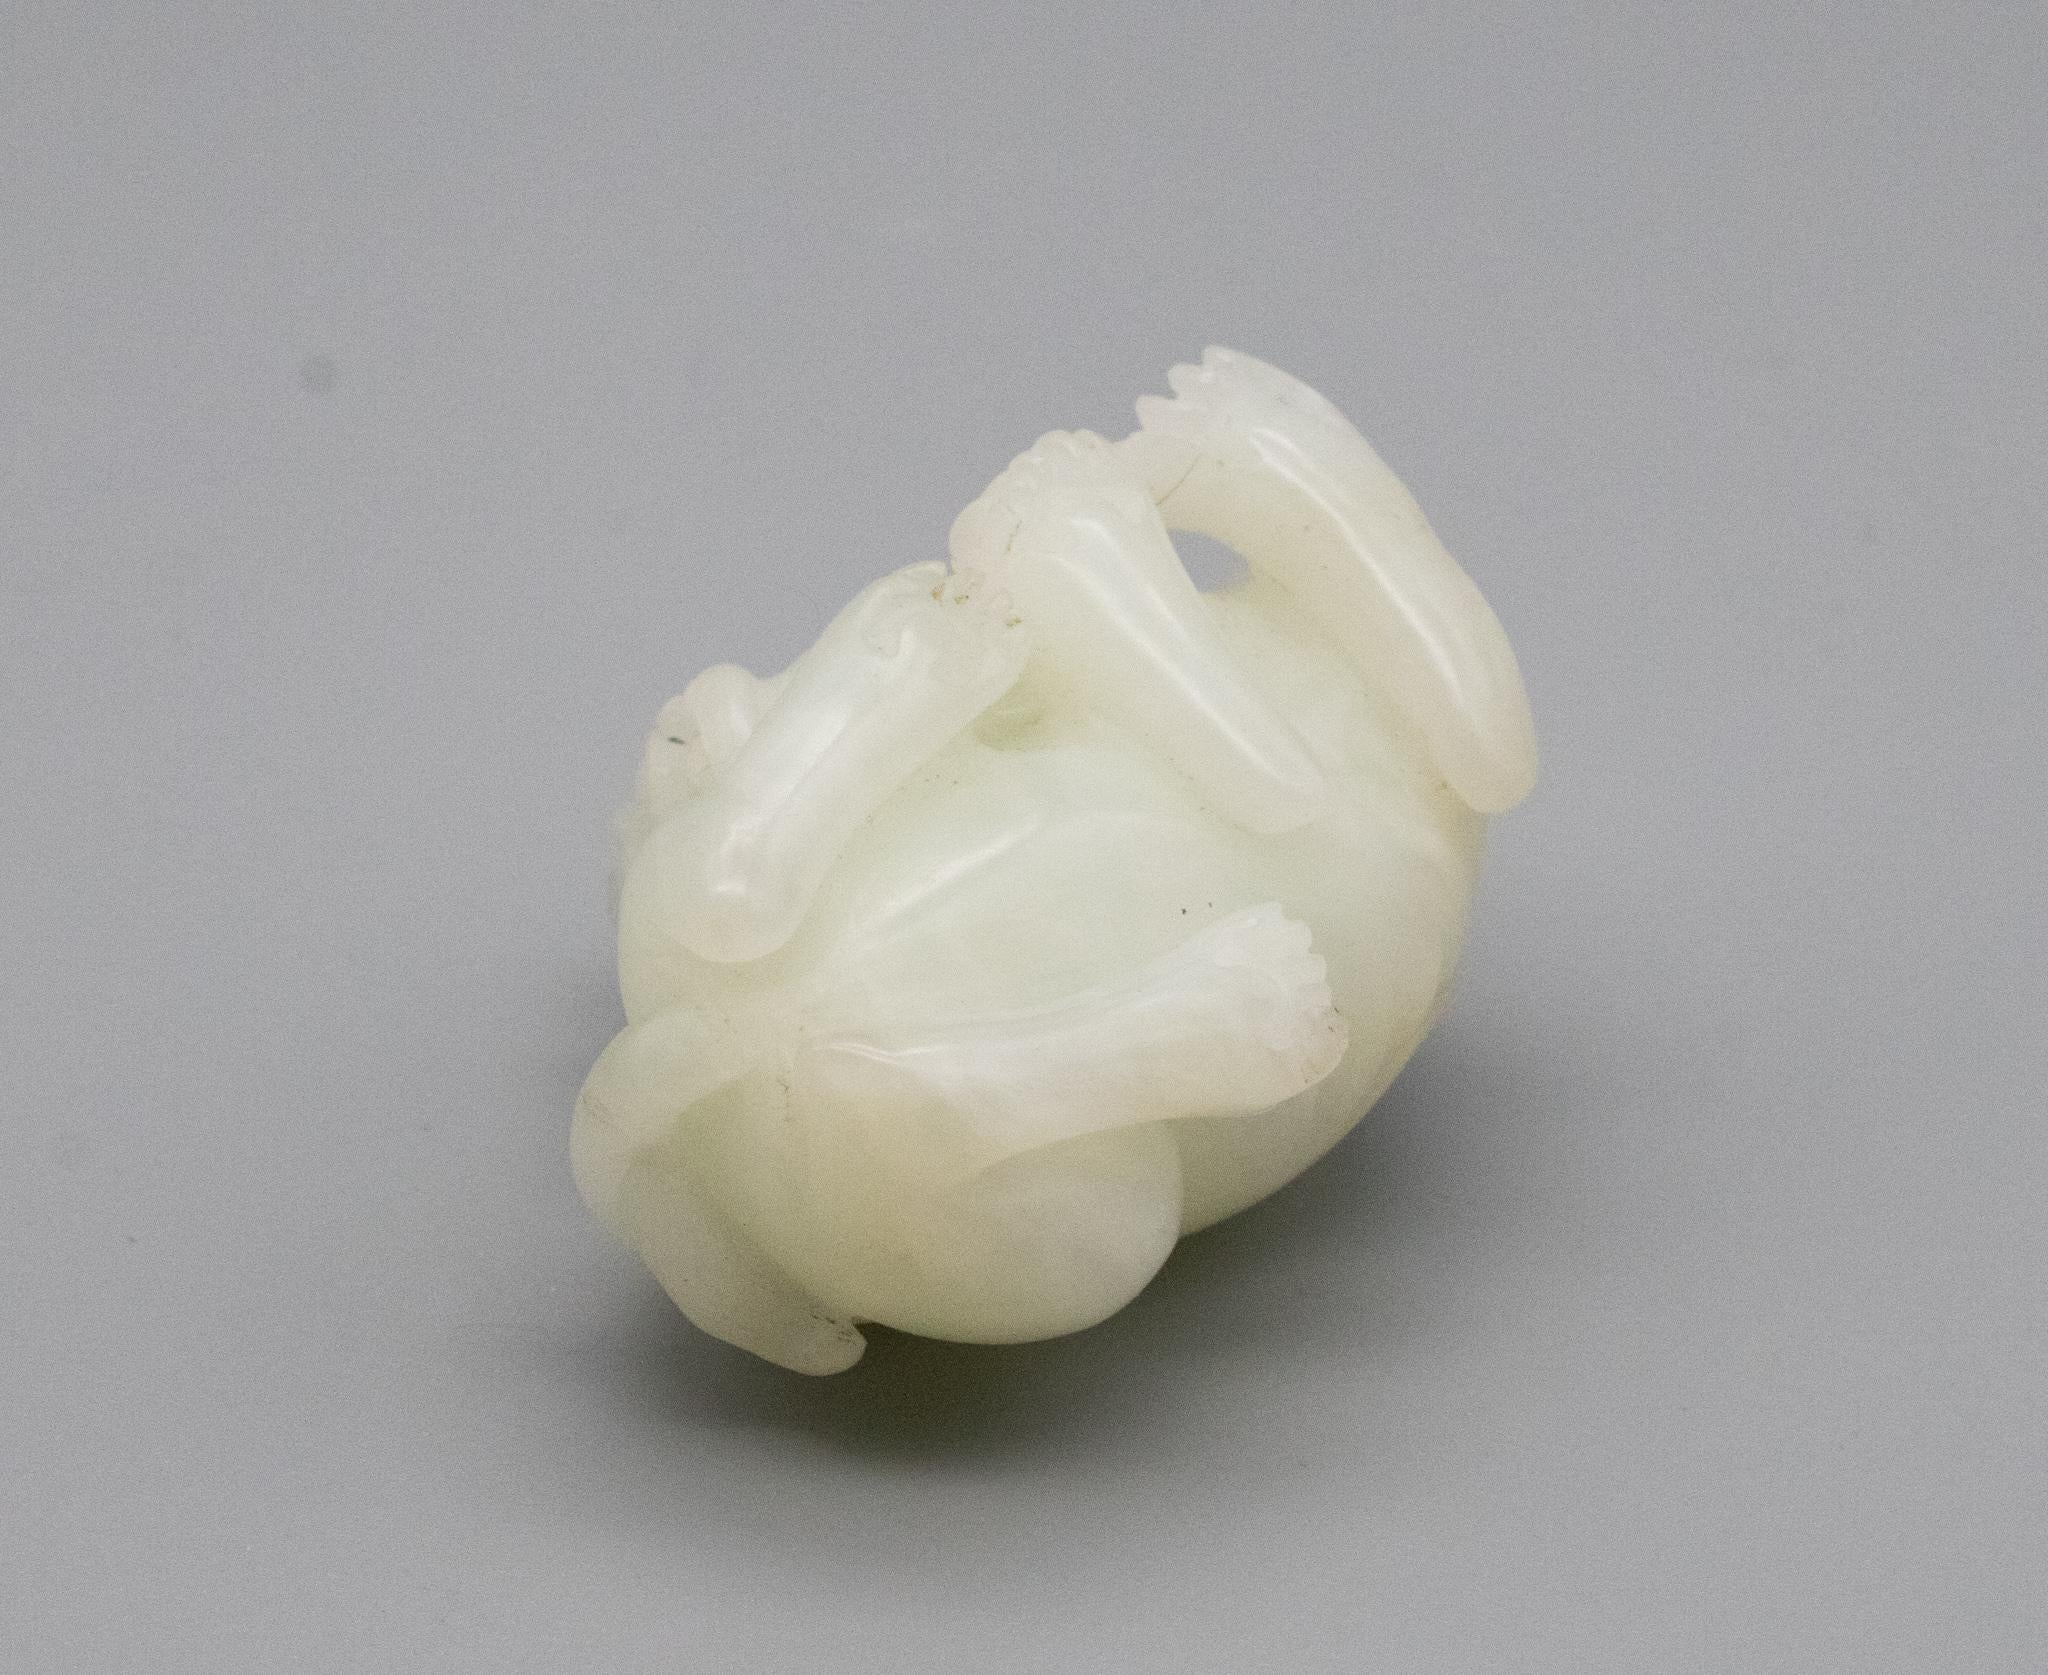 18th Century and Earlier China Qing Dynasty 18th Century Reclining Foo Dog Carved in White Nephrite Jade